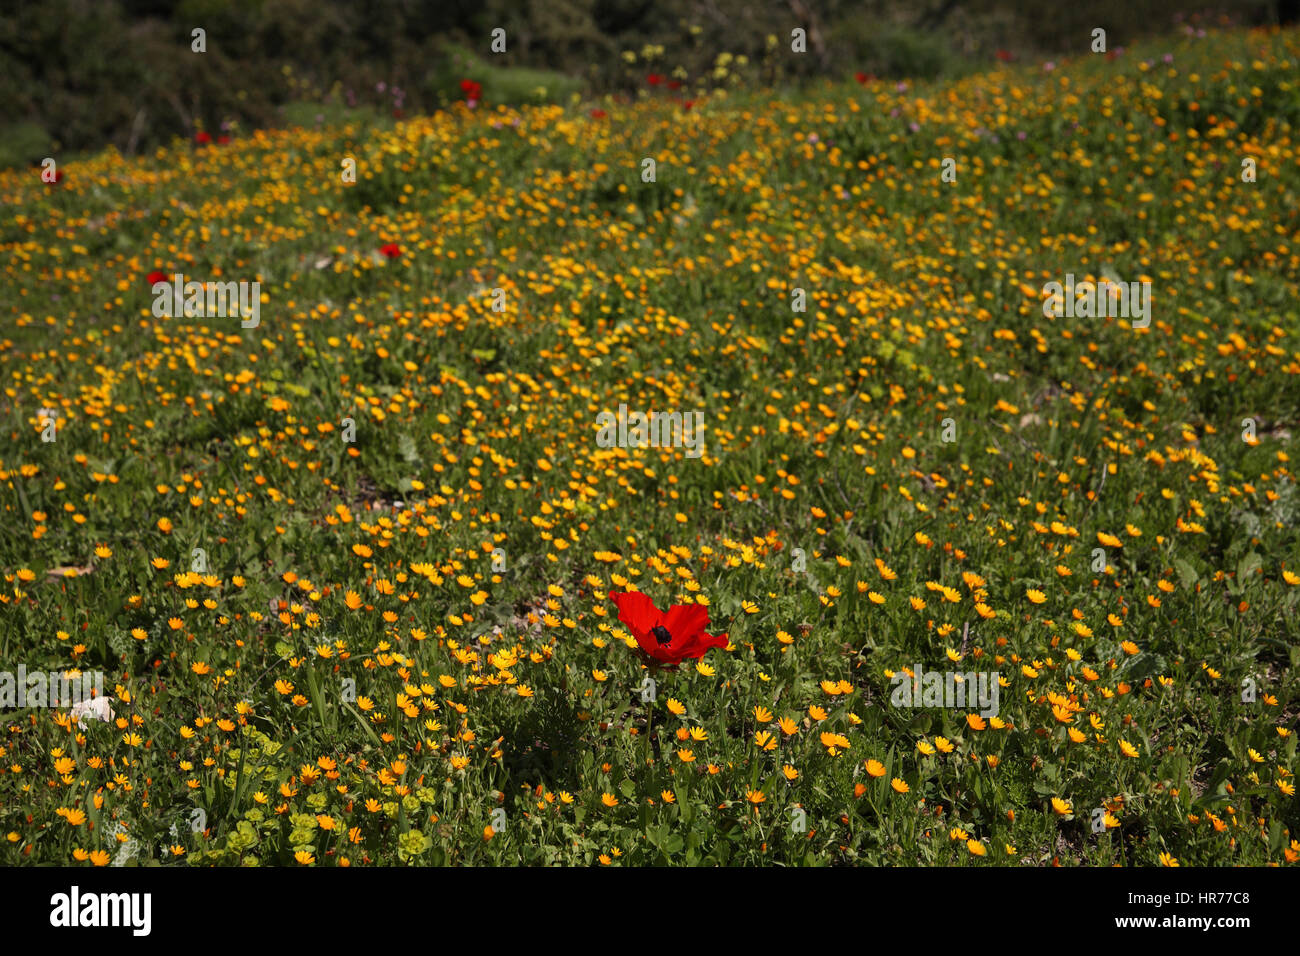 Red Anemones of the in a bed of yellow Marygold flowers of the Asteraceae family in Park Adulam. Hurvat Burgin, the Shfela, Israel. Stock Photo